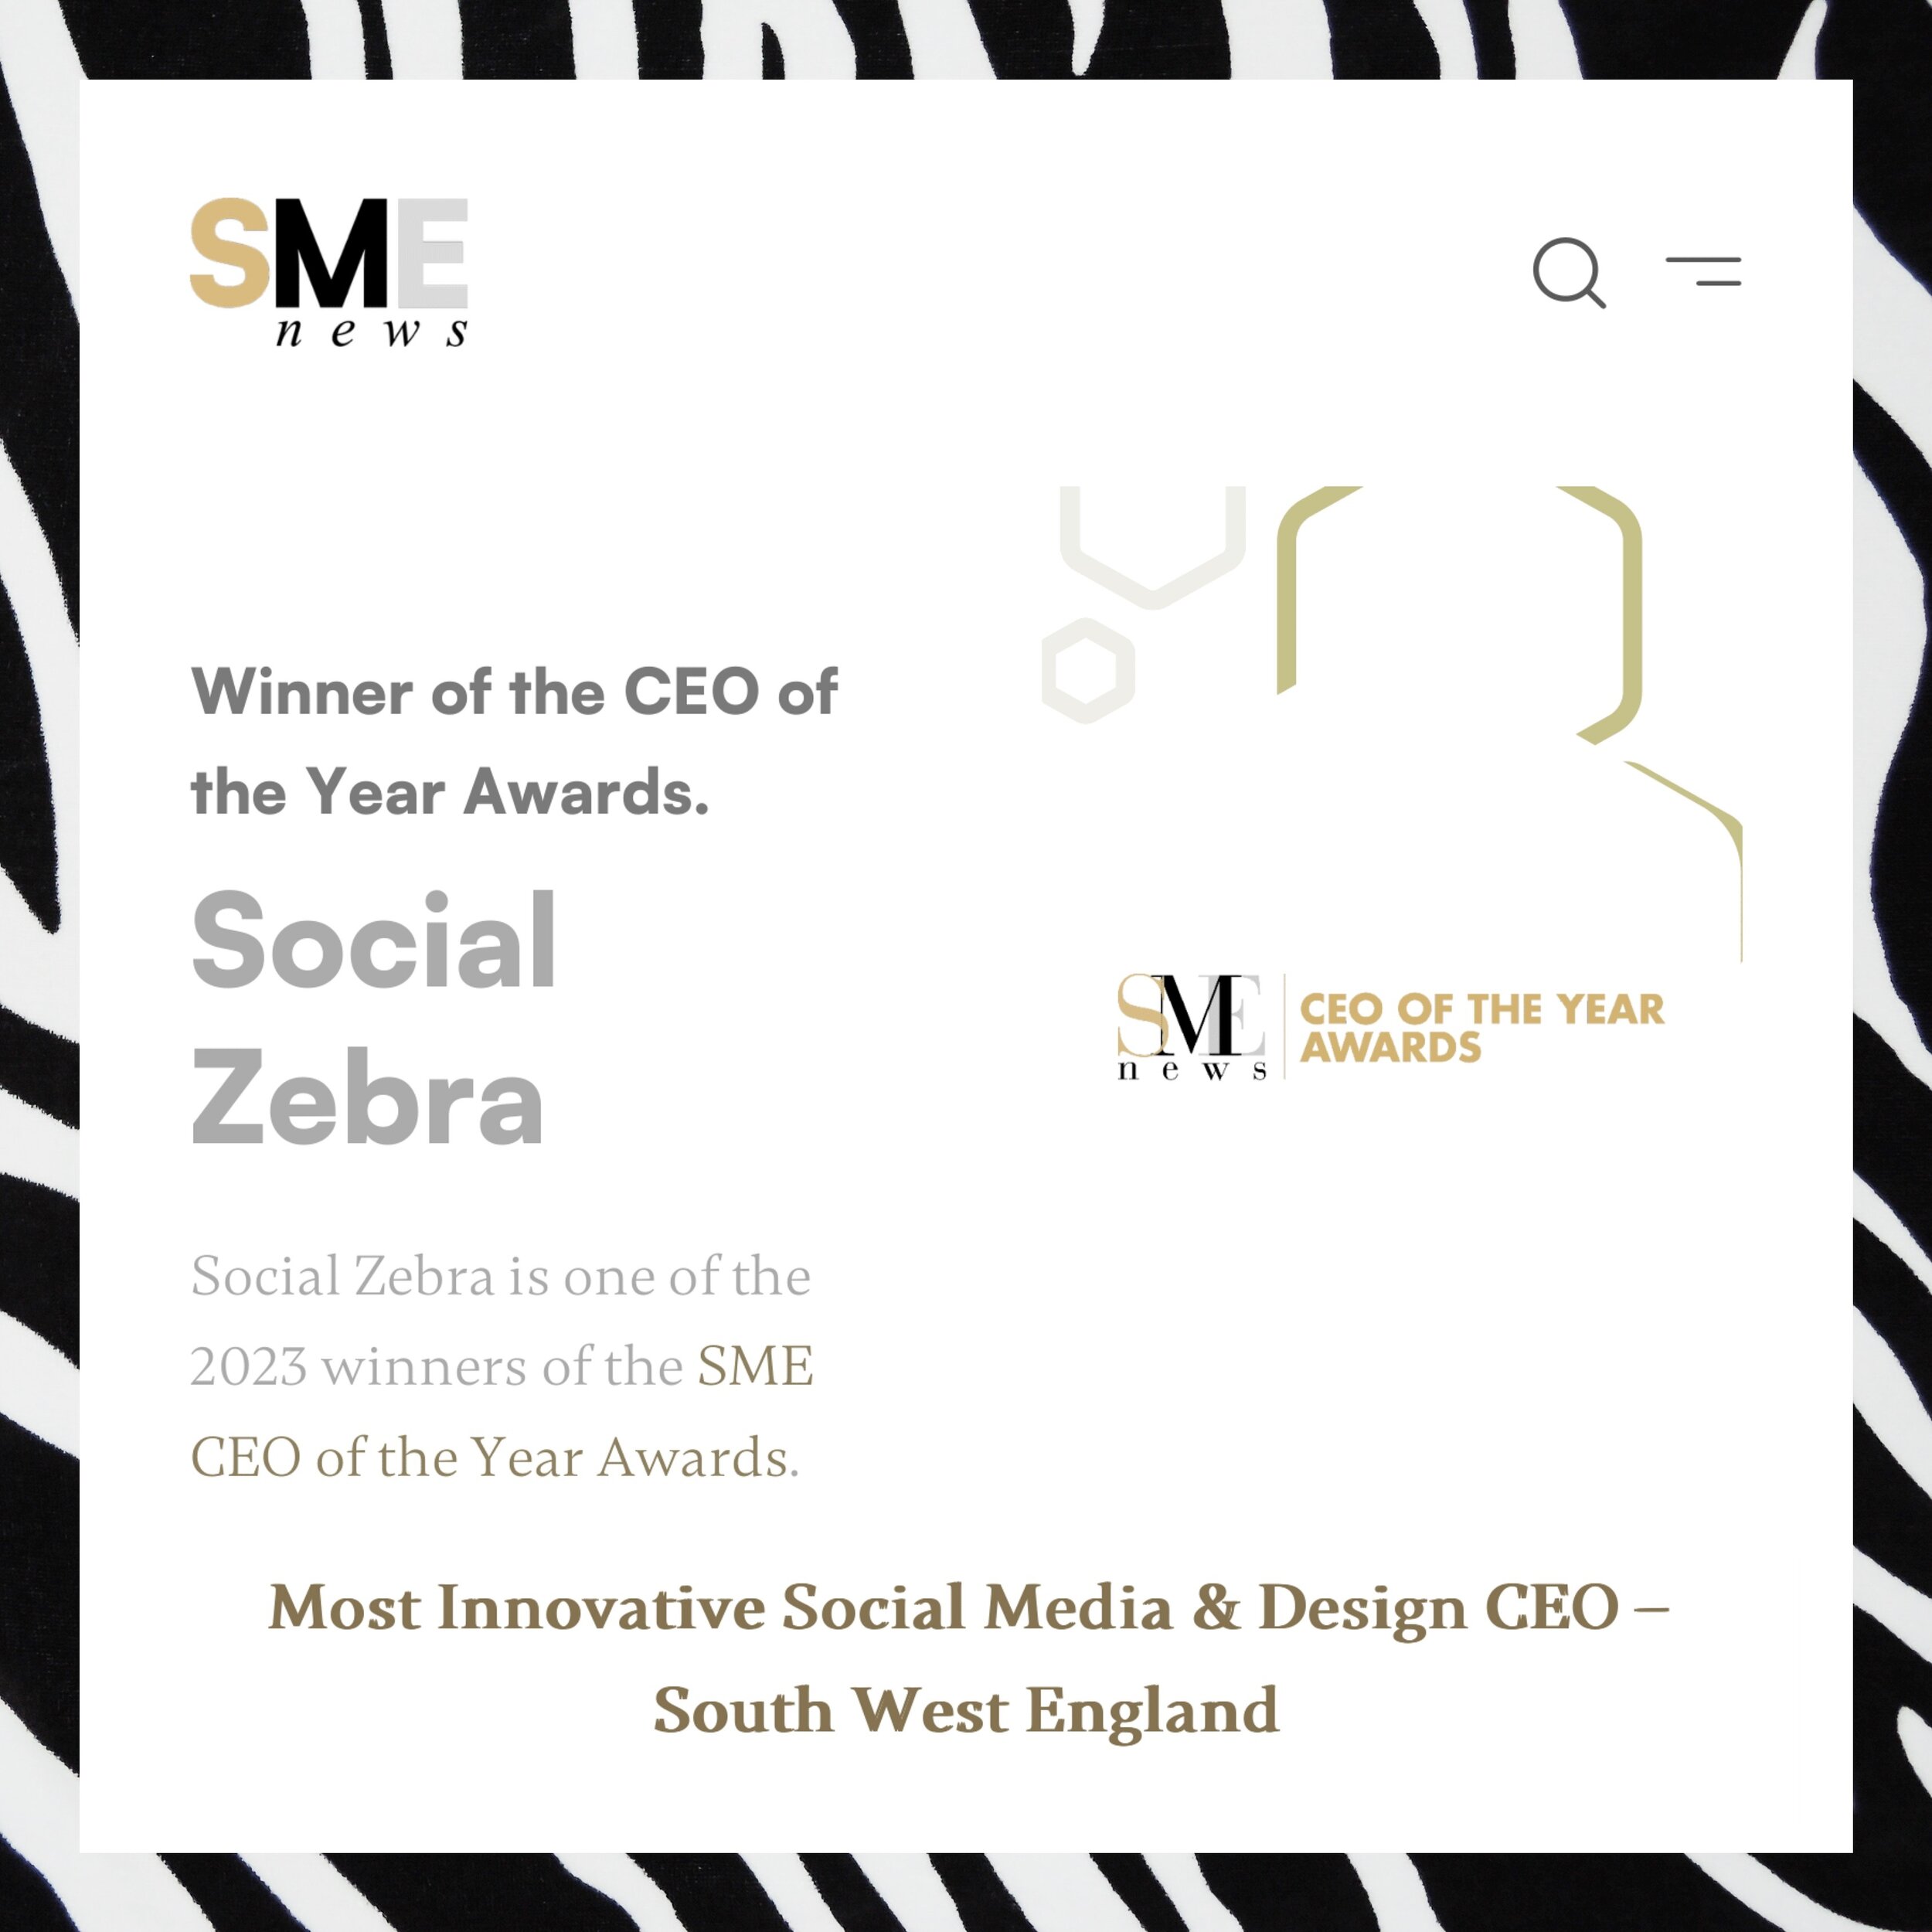 🎉 Most Innovative Social Media &amp; Design CEO 🎉

Wow, we&rsquo;re bursting with gratitude after receiving so many sweet messages after we shared this on our story a few days ago! 🤩 

Can you believe it? Our little business got nominated and is a